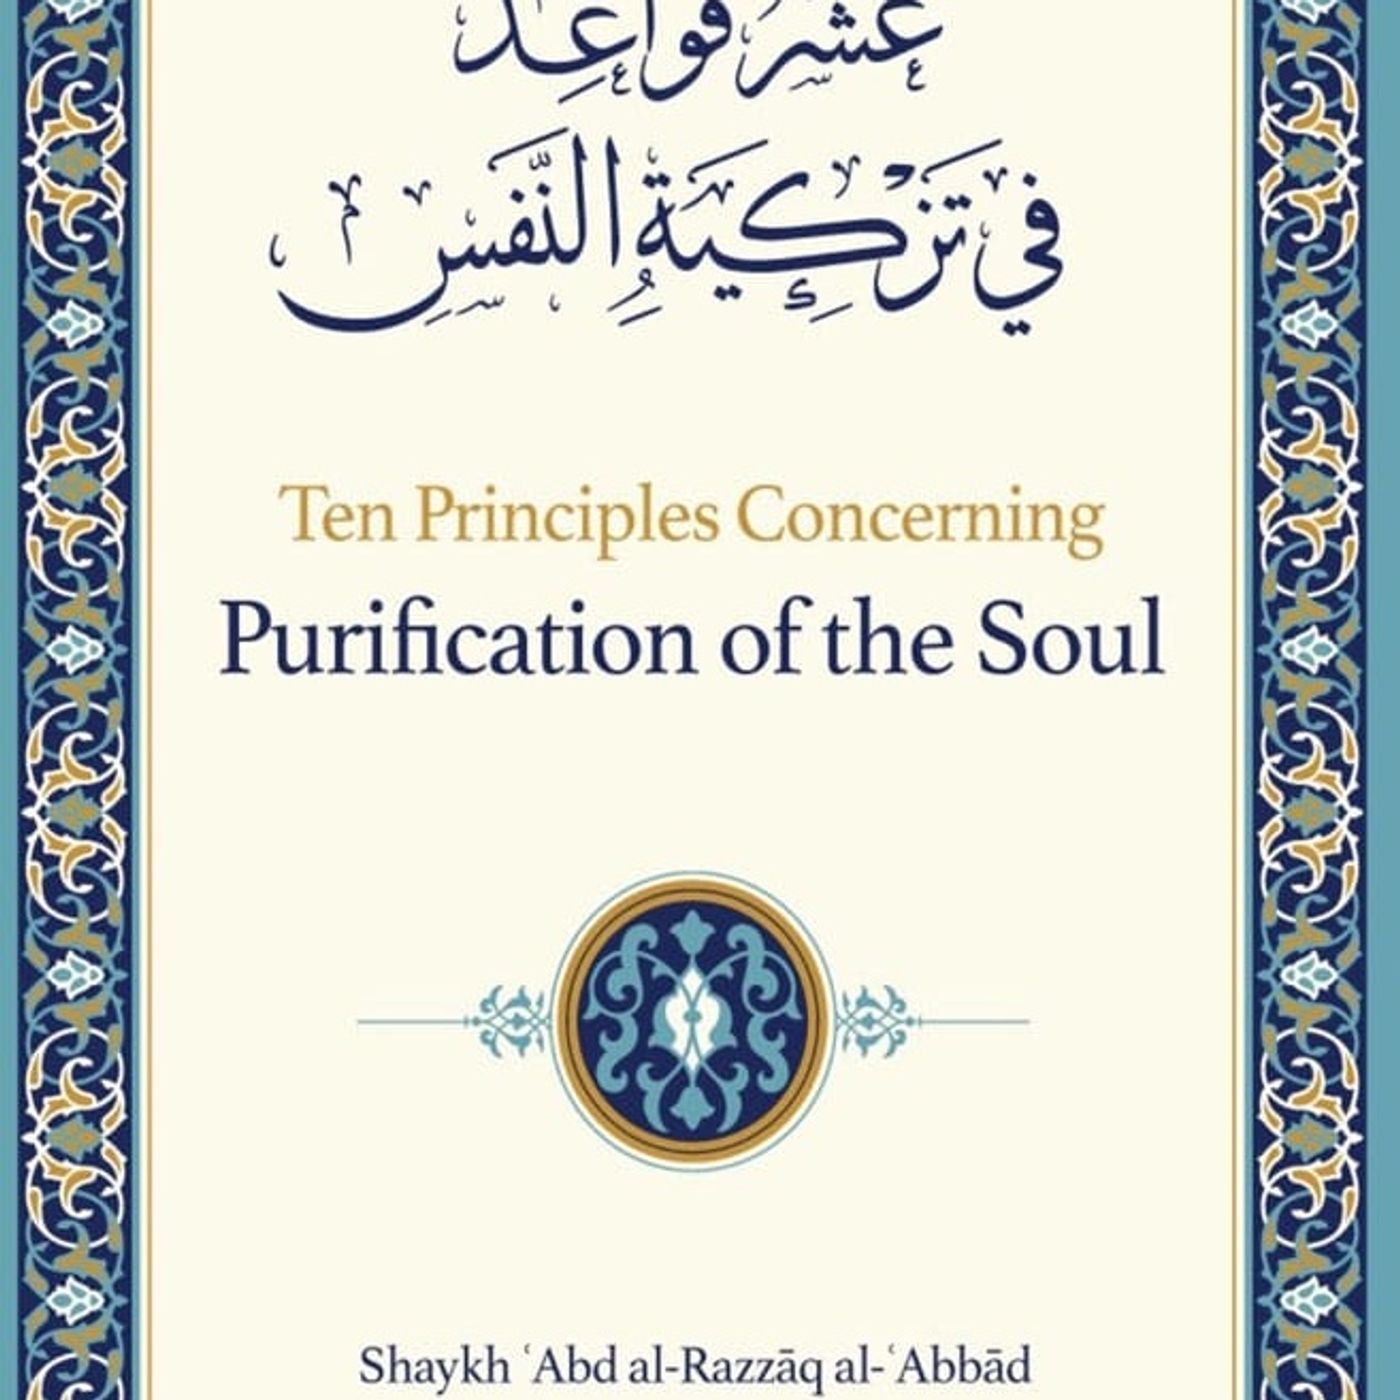 10 Principles on Purifying the Soul